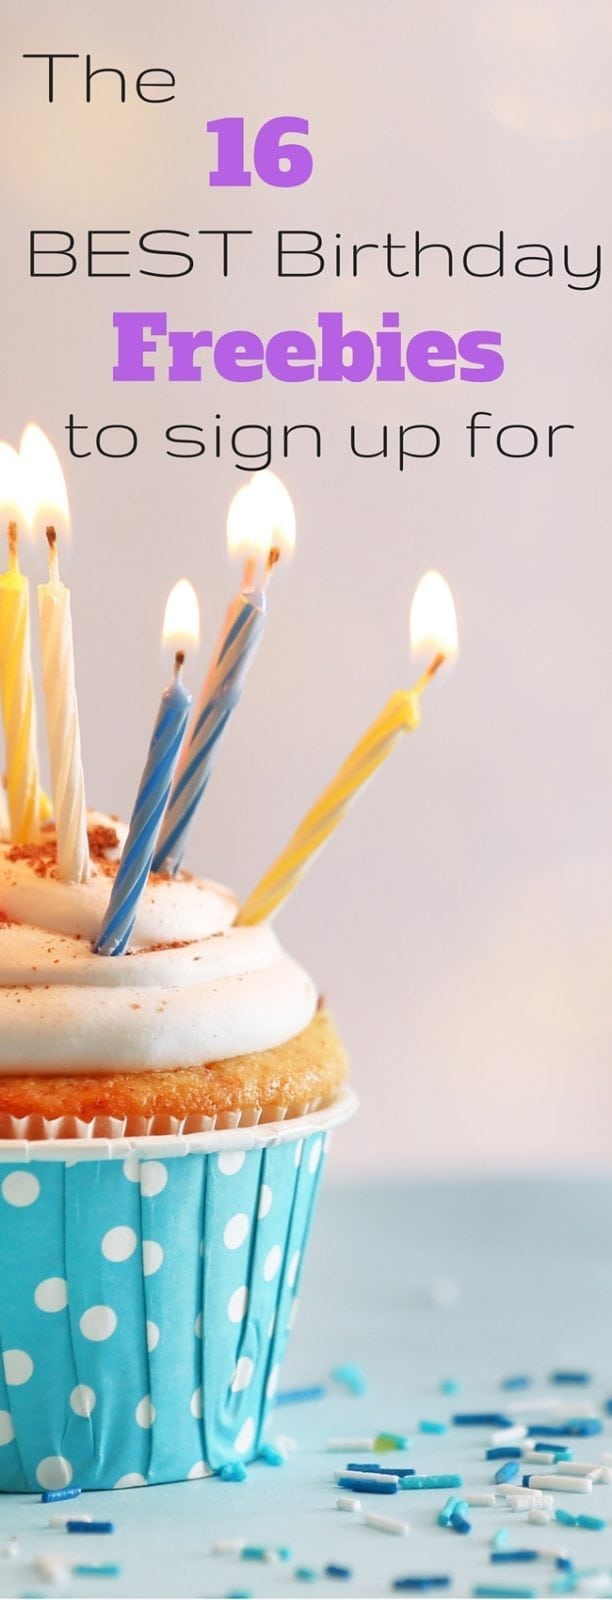 The BEST birthday freebies to sign up for - lots of free food with no purchase necessary!